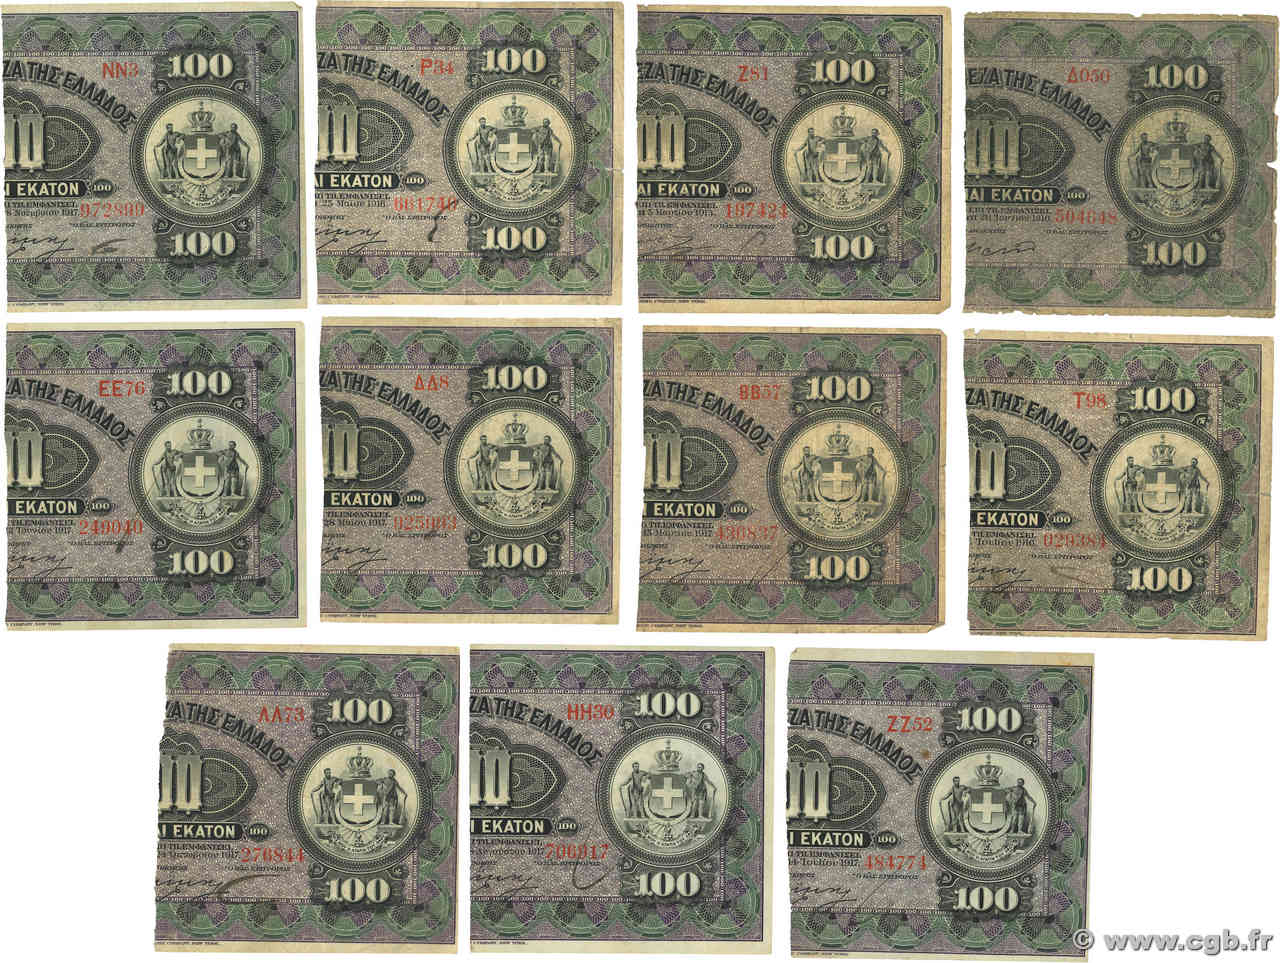 100 Drachmes = 50 Drachmes Lot GRIECHENLAND  1922 P.061 SGE to S